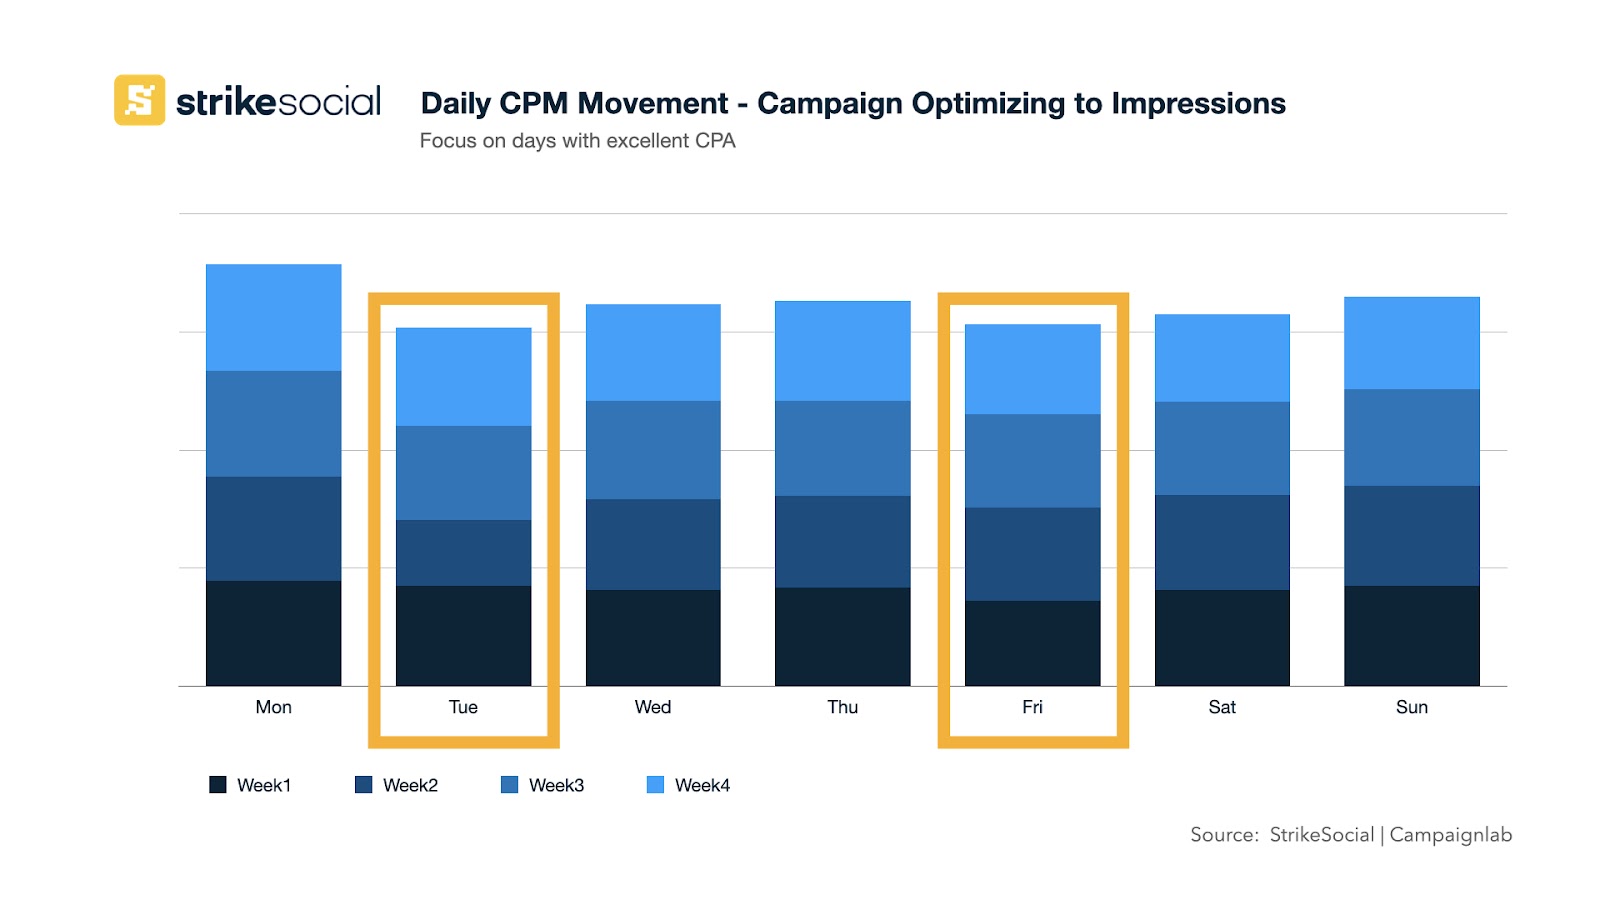 Factors Affecting Campaign Success - Day of the Week